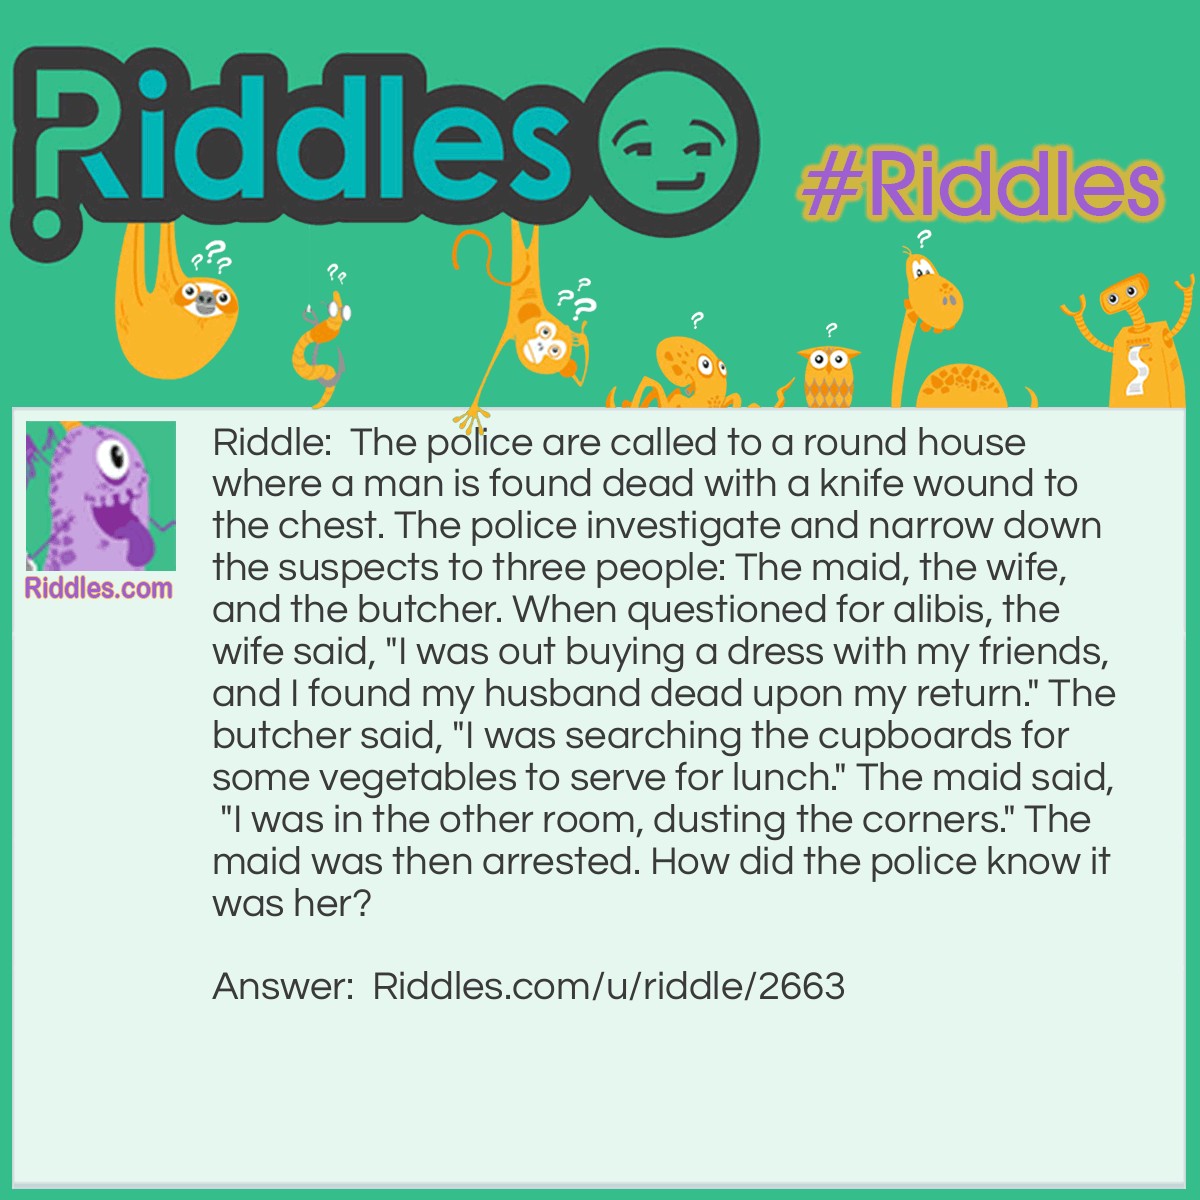 Riddle: The police are called to a roundhouse where a man is found dead with a knife wound to the chest. The police investigate and narrow down the suspects to three people: The maid, the wife, and the butcher. When questioned for alibis, the wife said, "I was out buying a dress with my friends, and I found my husband dead upon my return." The butcher said, "I was searching the cupboards for some vegetables to serve for lunch." The maid said, "I was in the other room, dusting the corners." The maid was then arrested. How did the police know it was her? Answer: It was a round house, so there were no corners to dust.